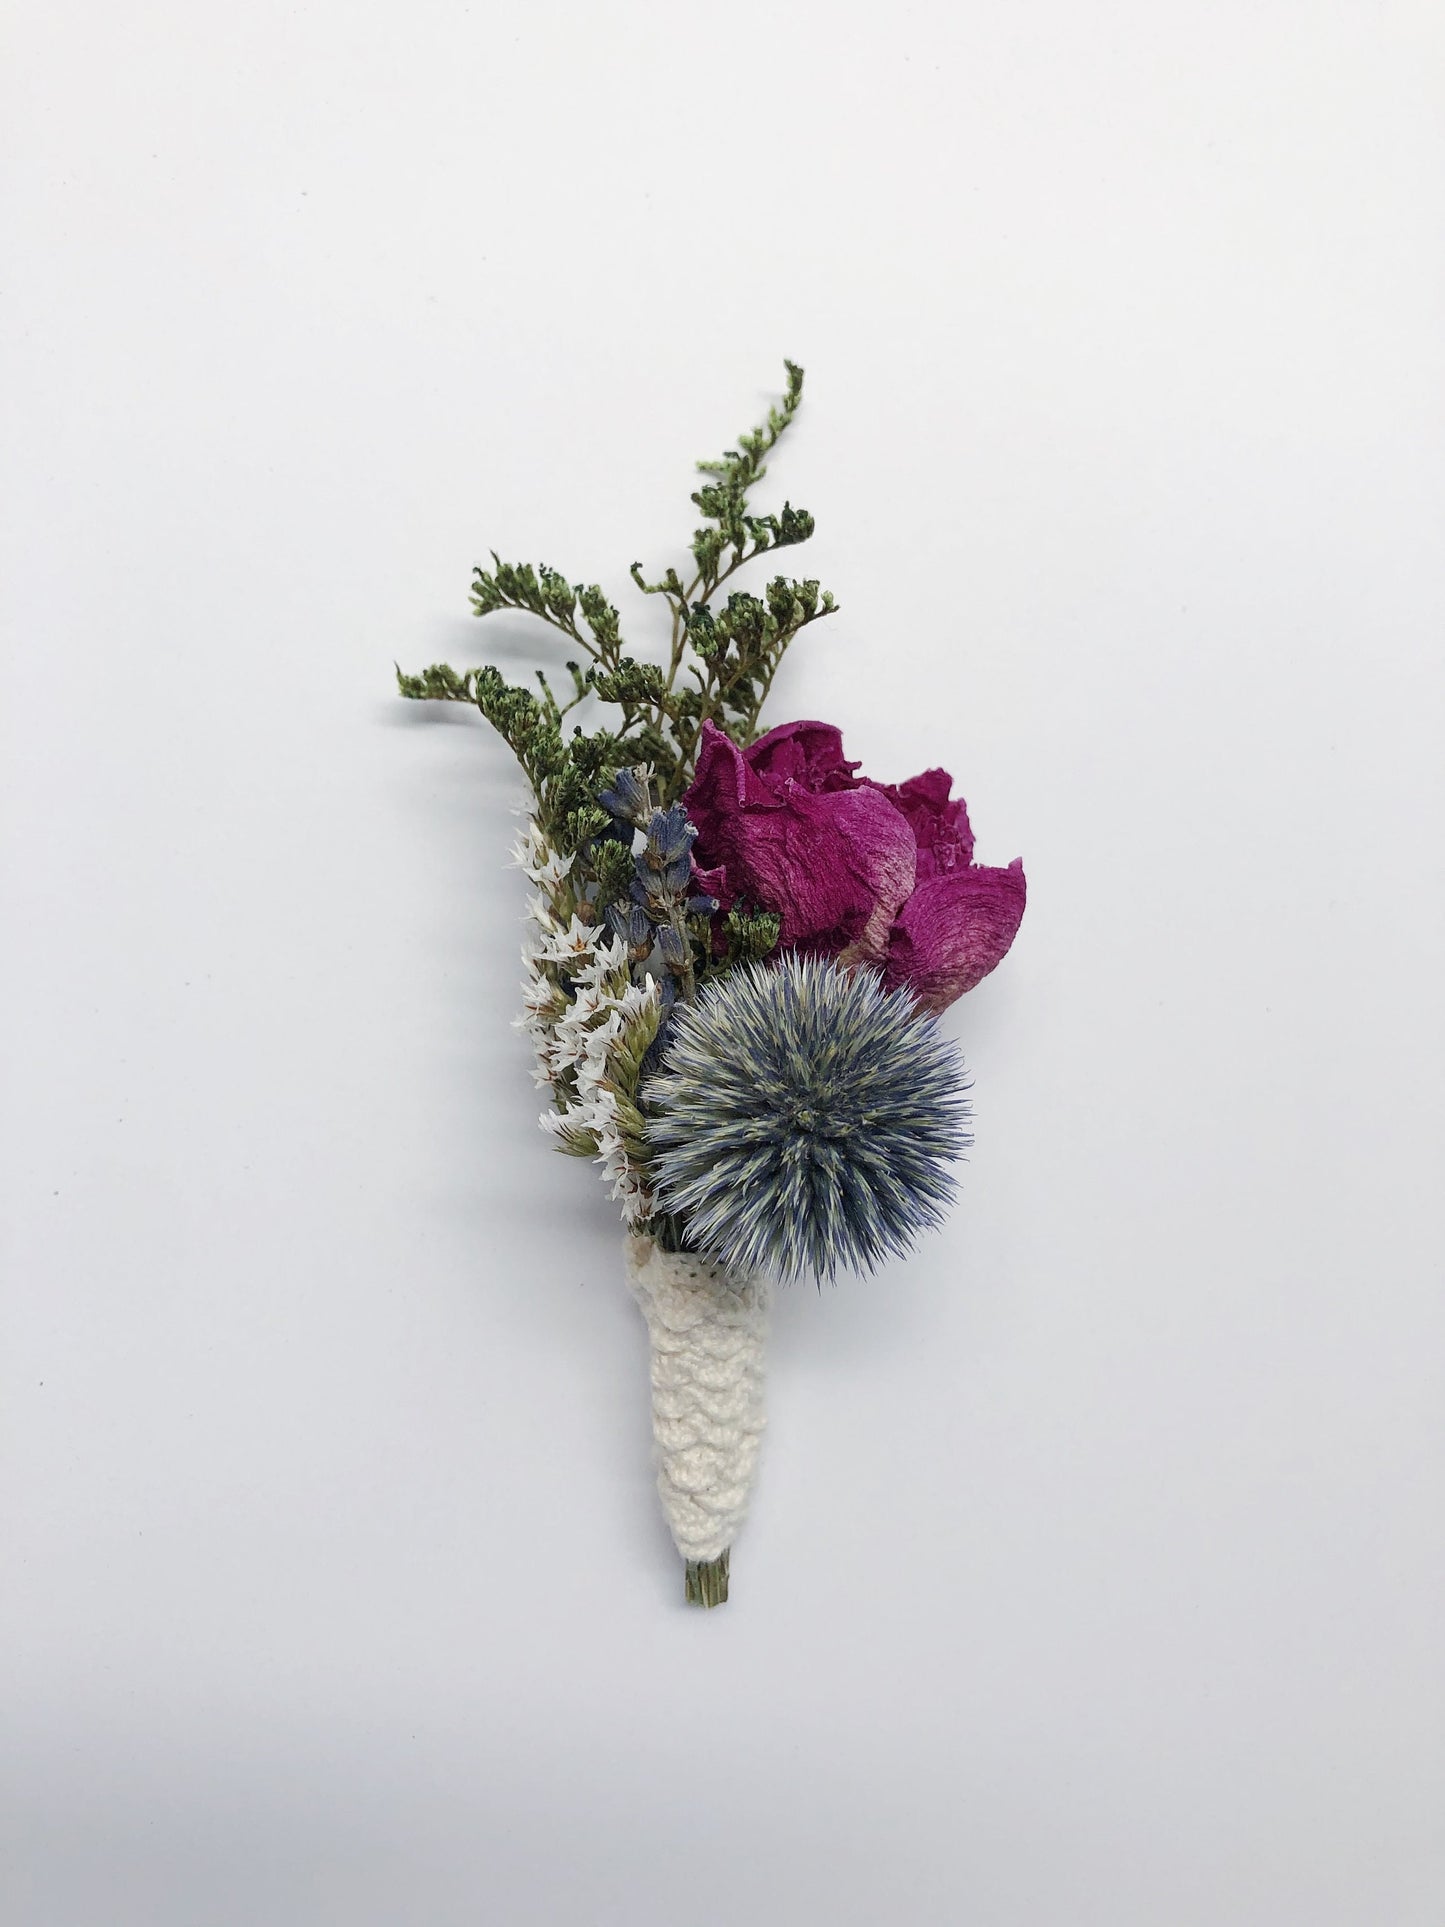 Wedding Boutonniere, Dried flowers, Preserved Boutonniere, Wedding Accessory, House Decoration, Rustic Wedding, Simplicity, Simple, Neutral